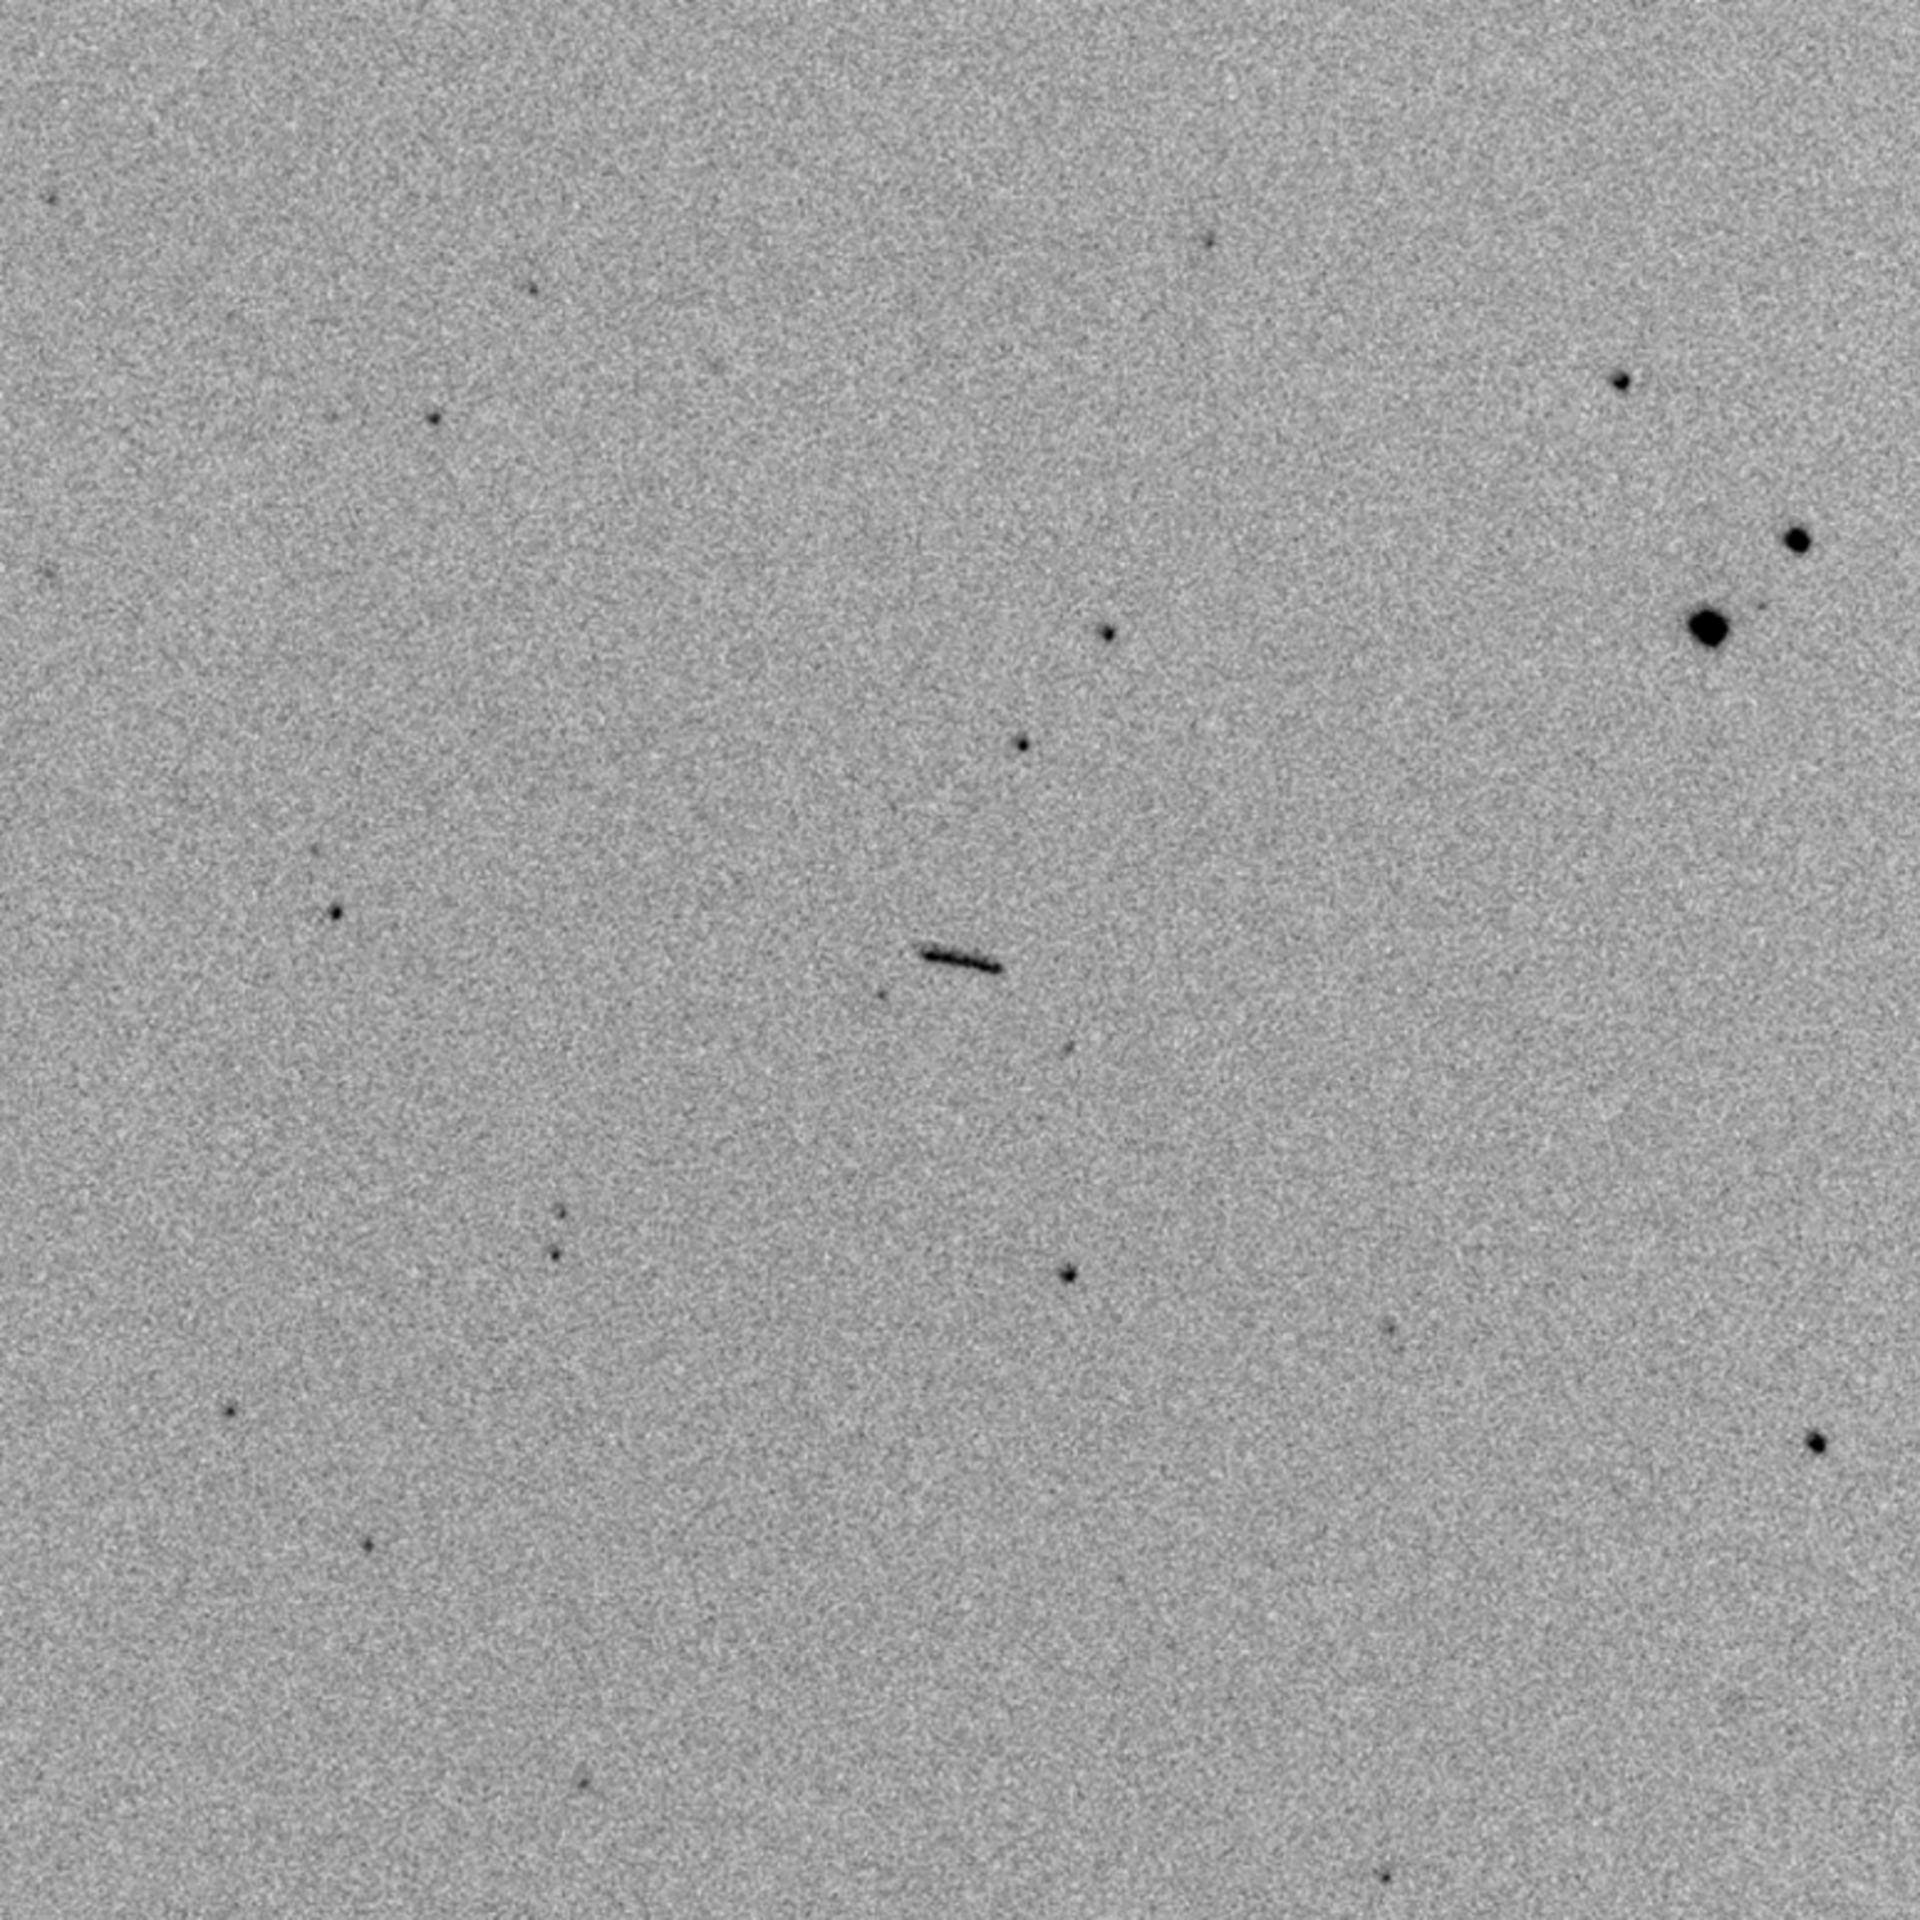 Kleť Observatory sees asteroid 2022 EB5, 13 minutes before impact